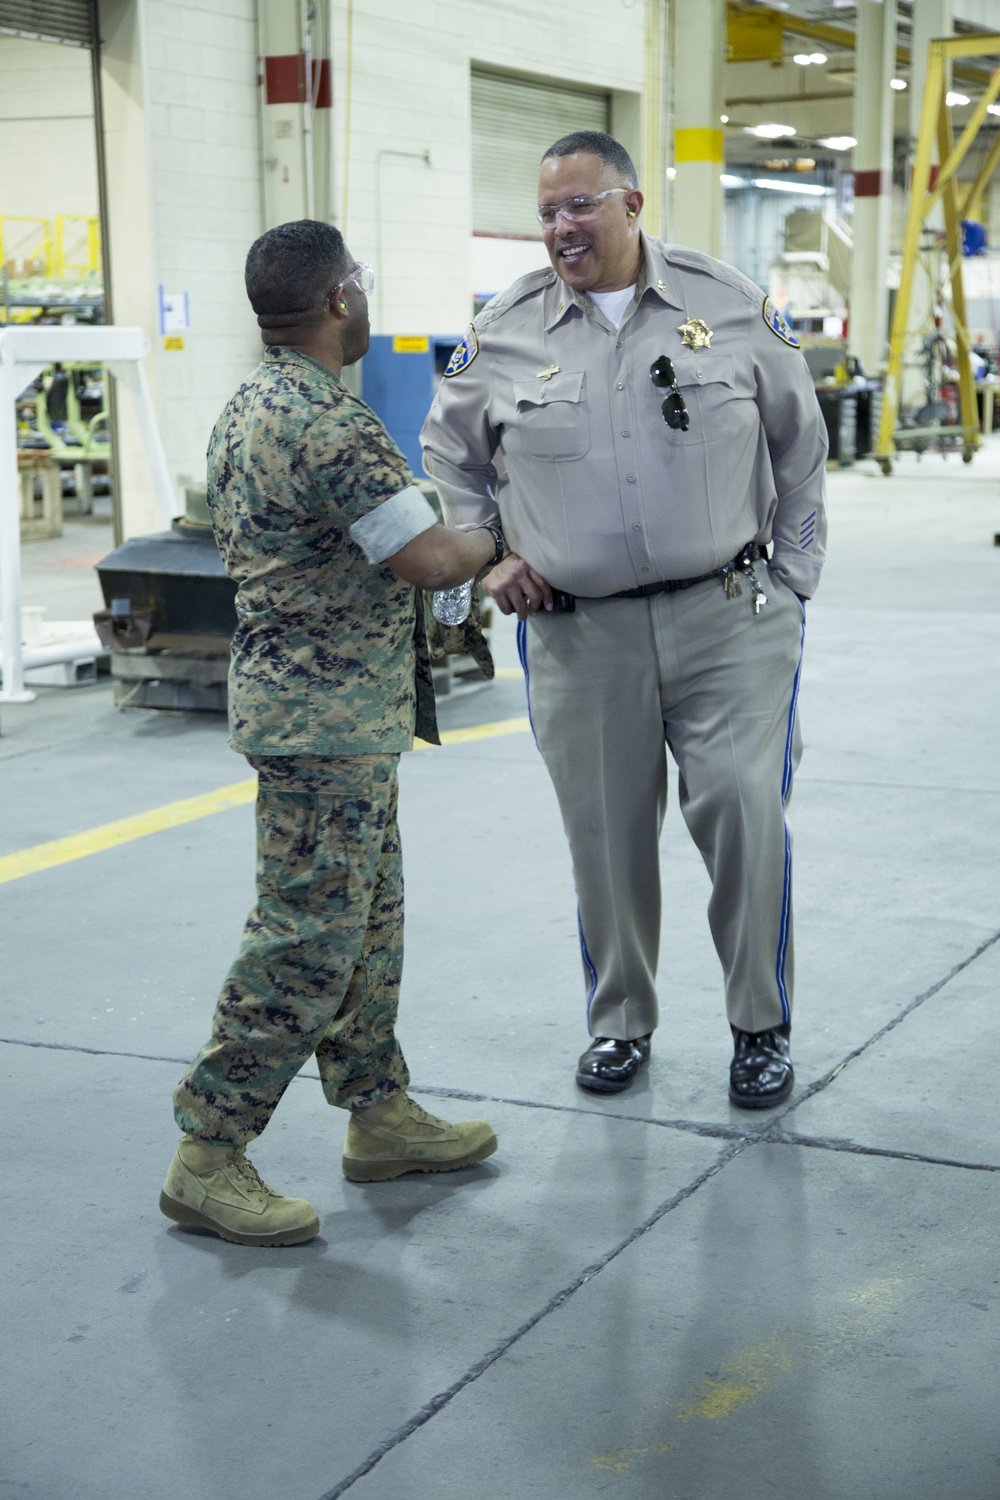 CHP command tours MCLB Barstow